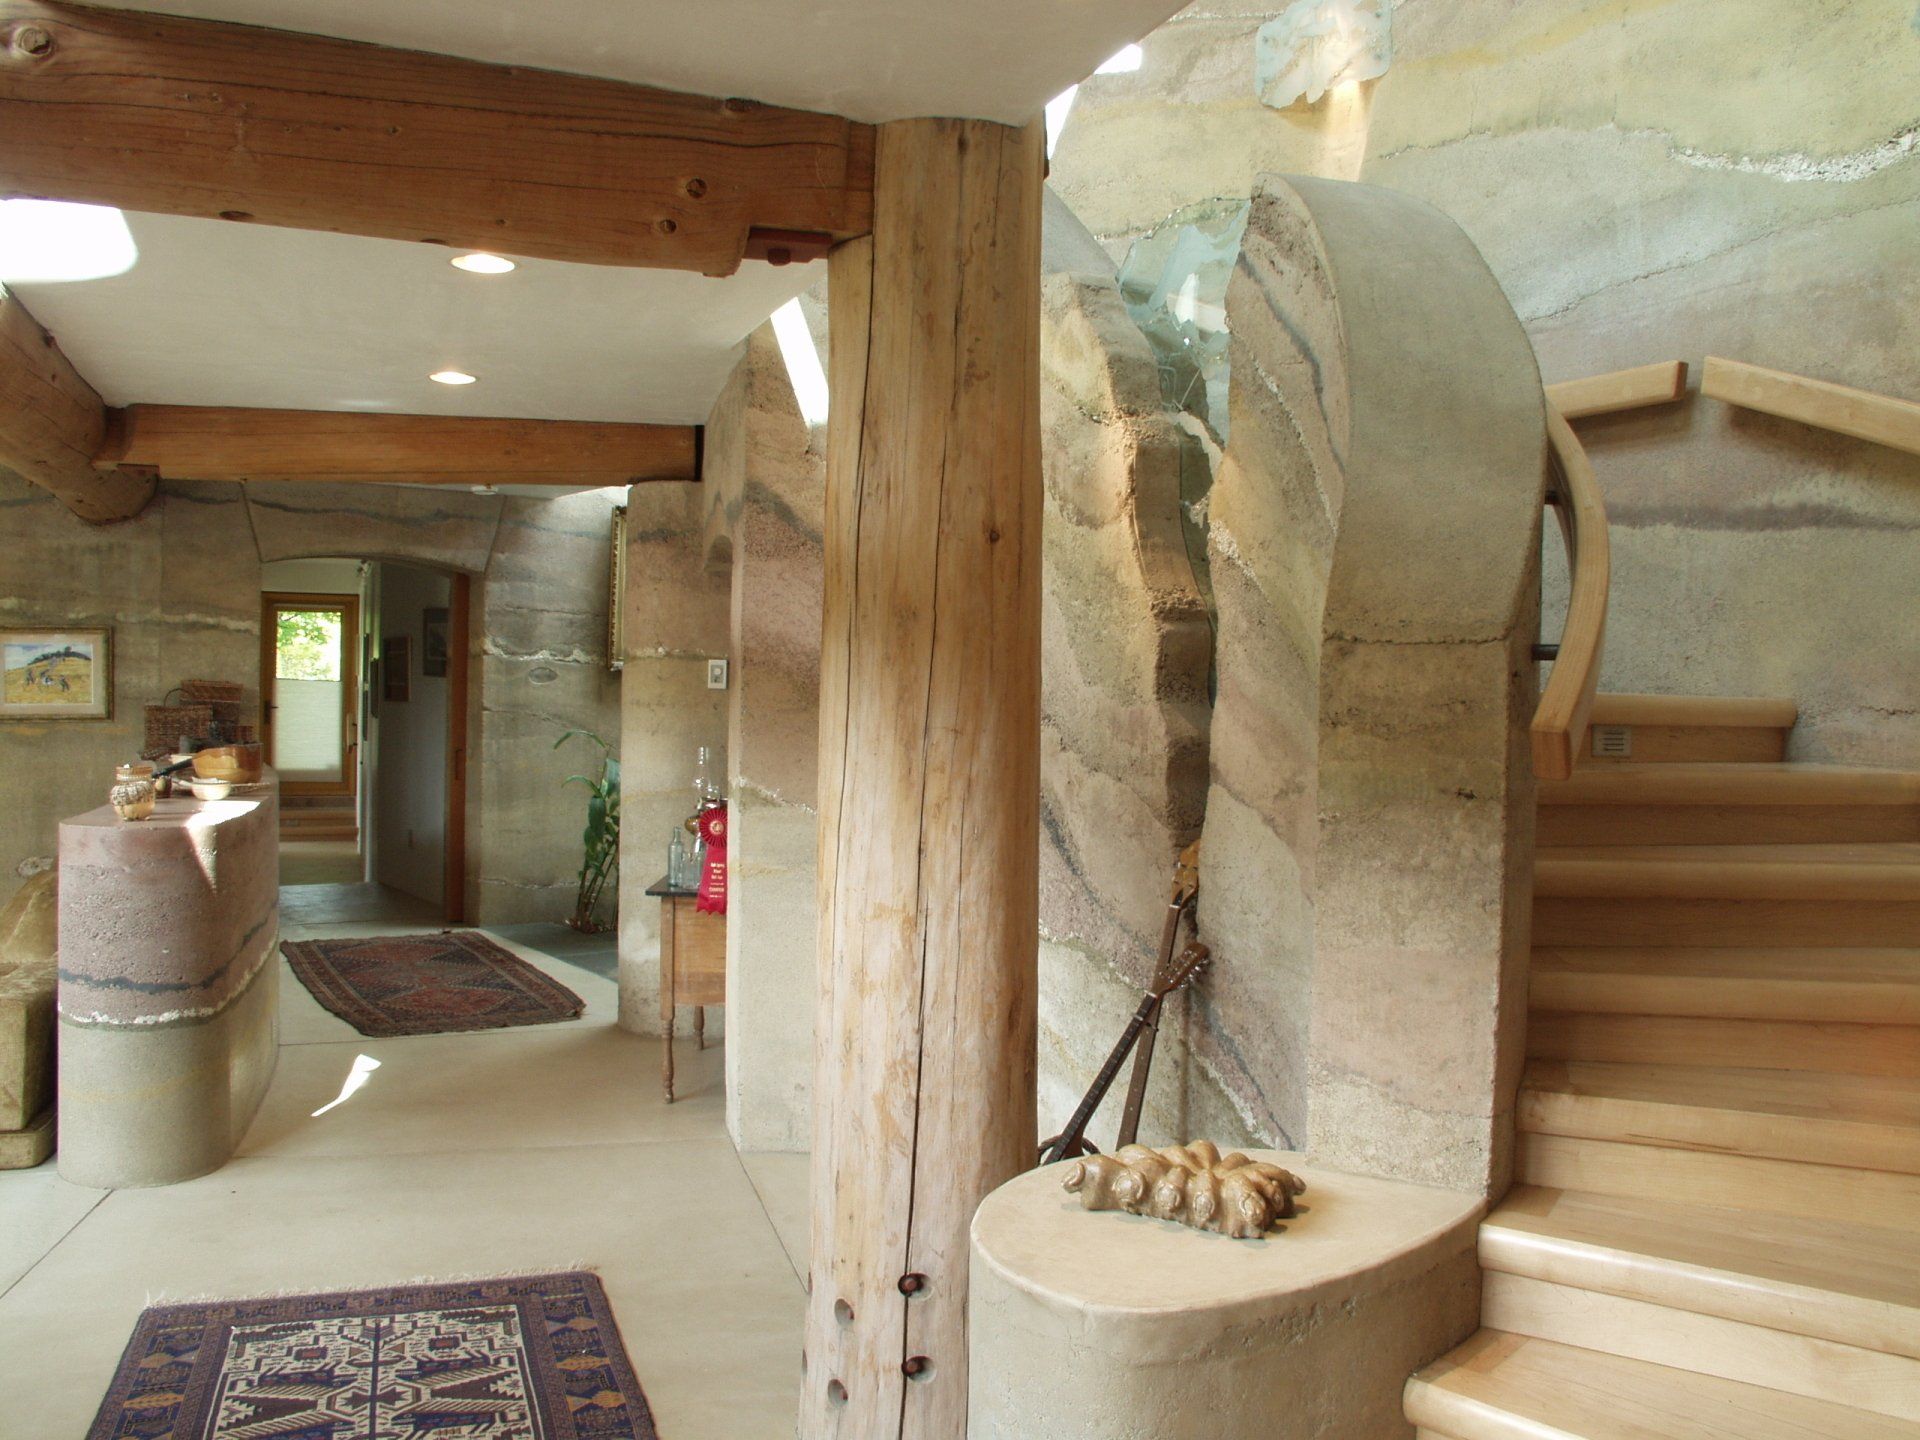 rammed earth stairway, walls, and room divider